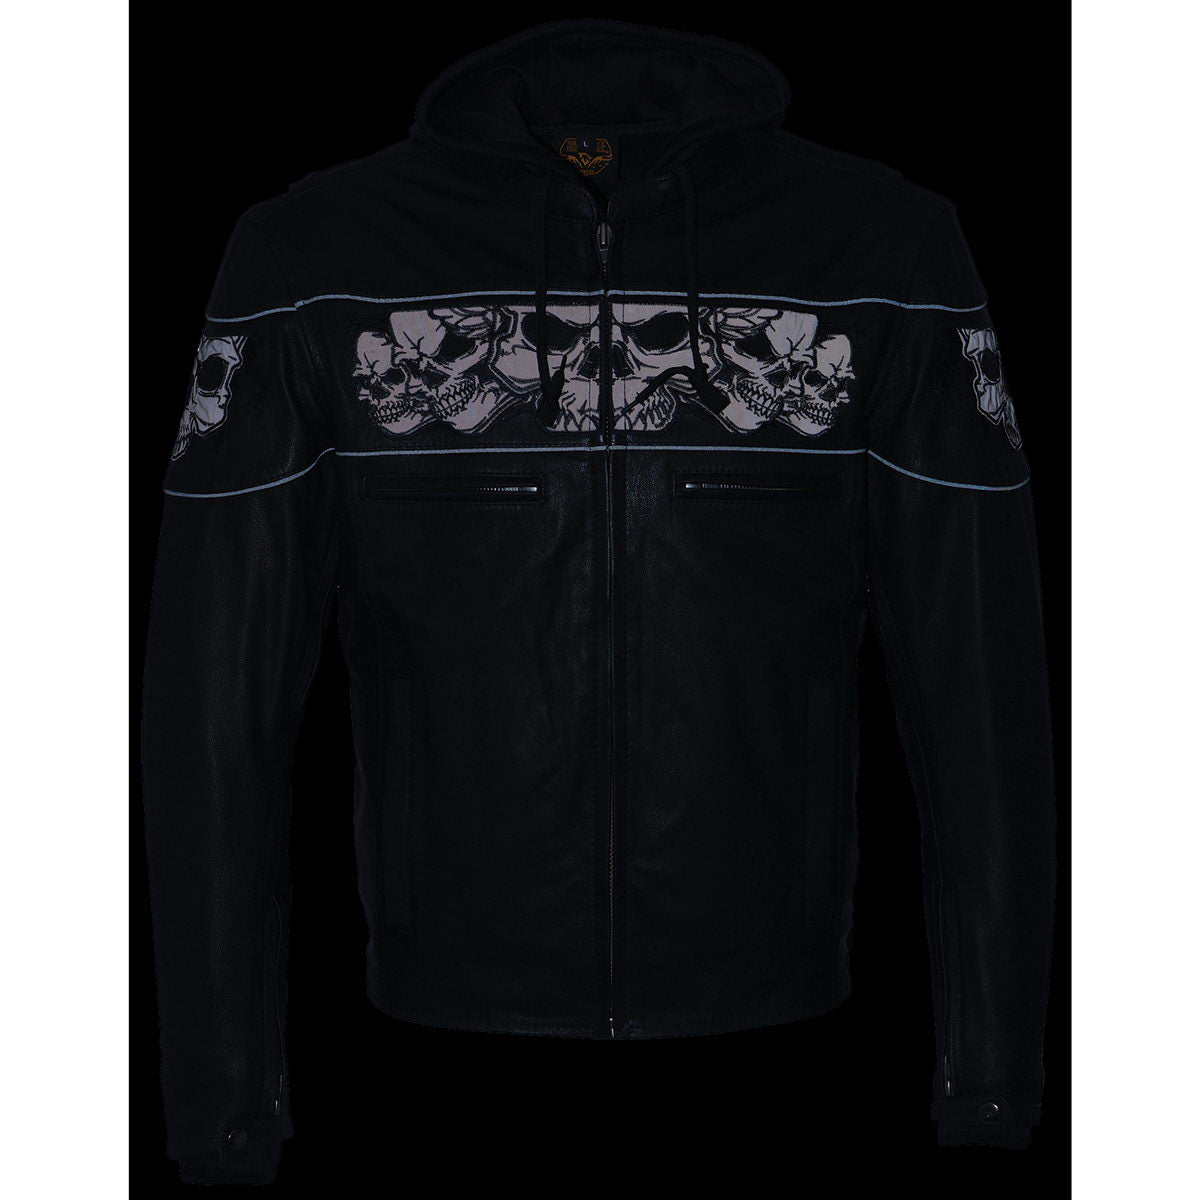 Milwaukee Leather MLM1563 Men's Black Leather Scooter Style Motorcycle Jacket with Reflective Skulls w/ Hoodie